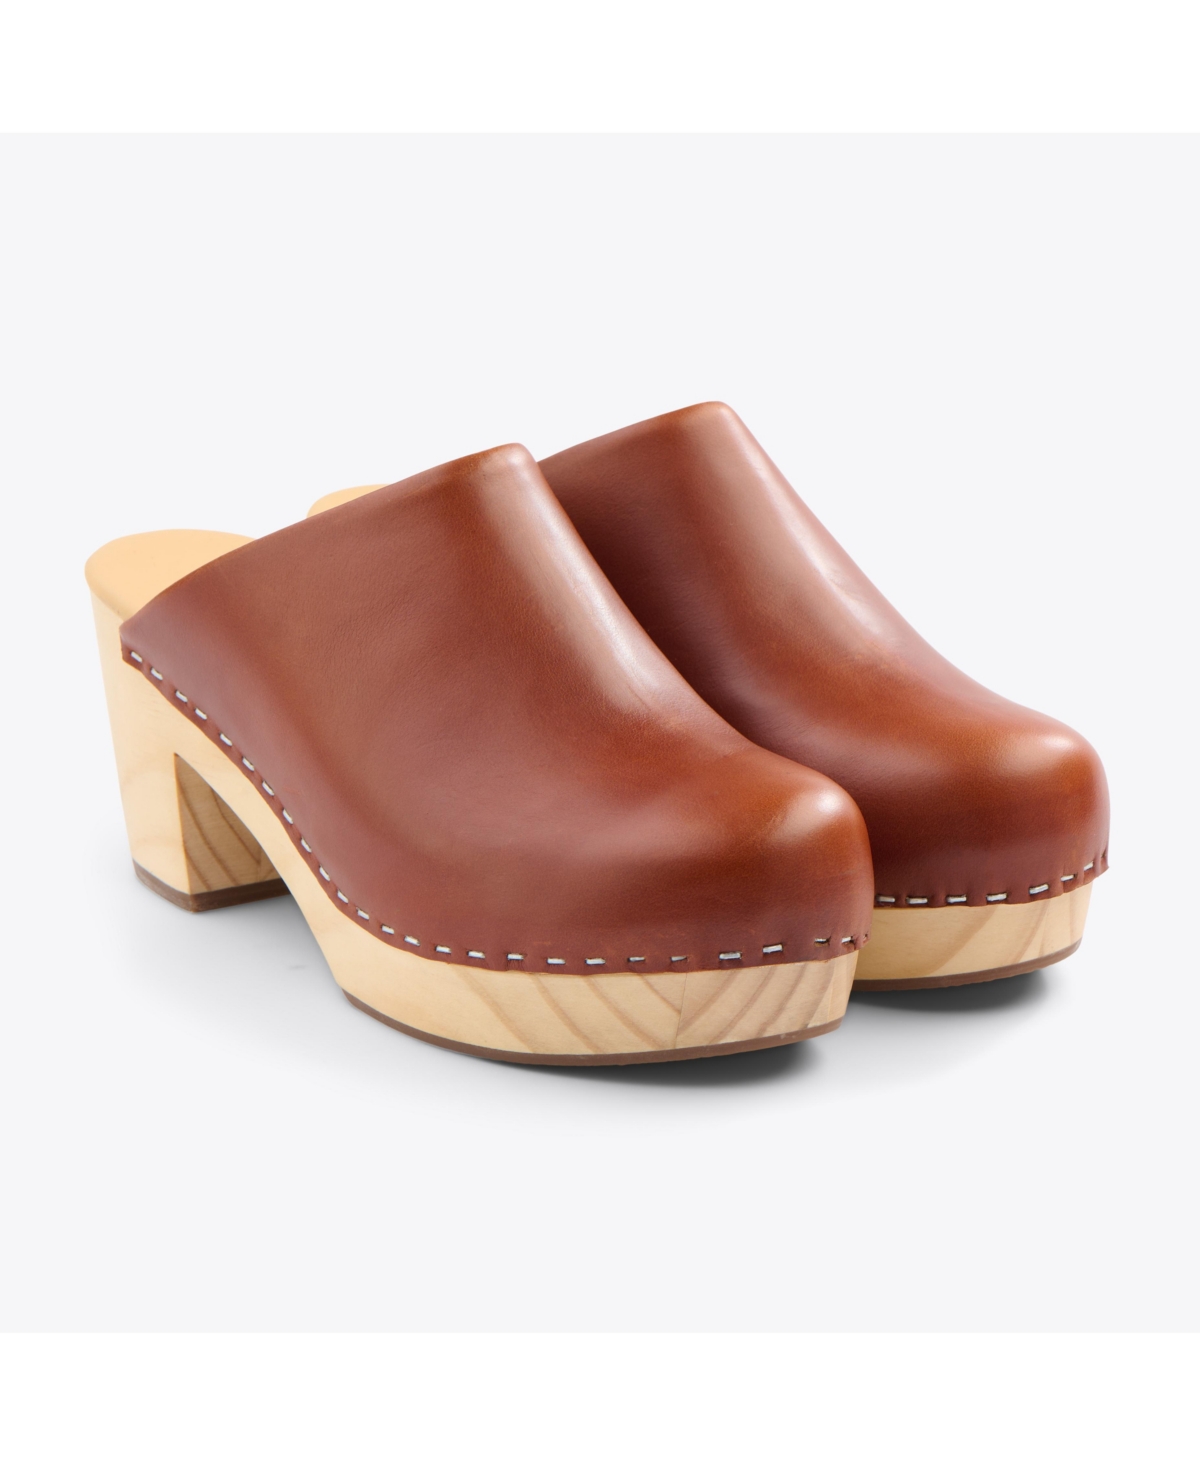 NISOLO WOMEN'S ALL-DAY HEELED CLOG